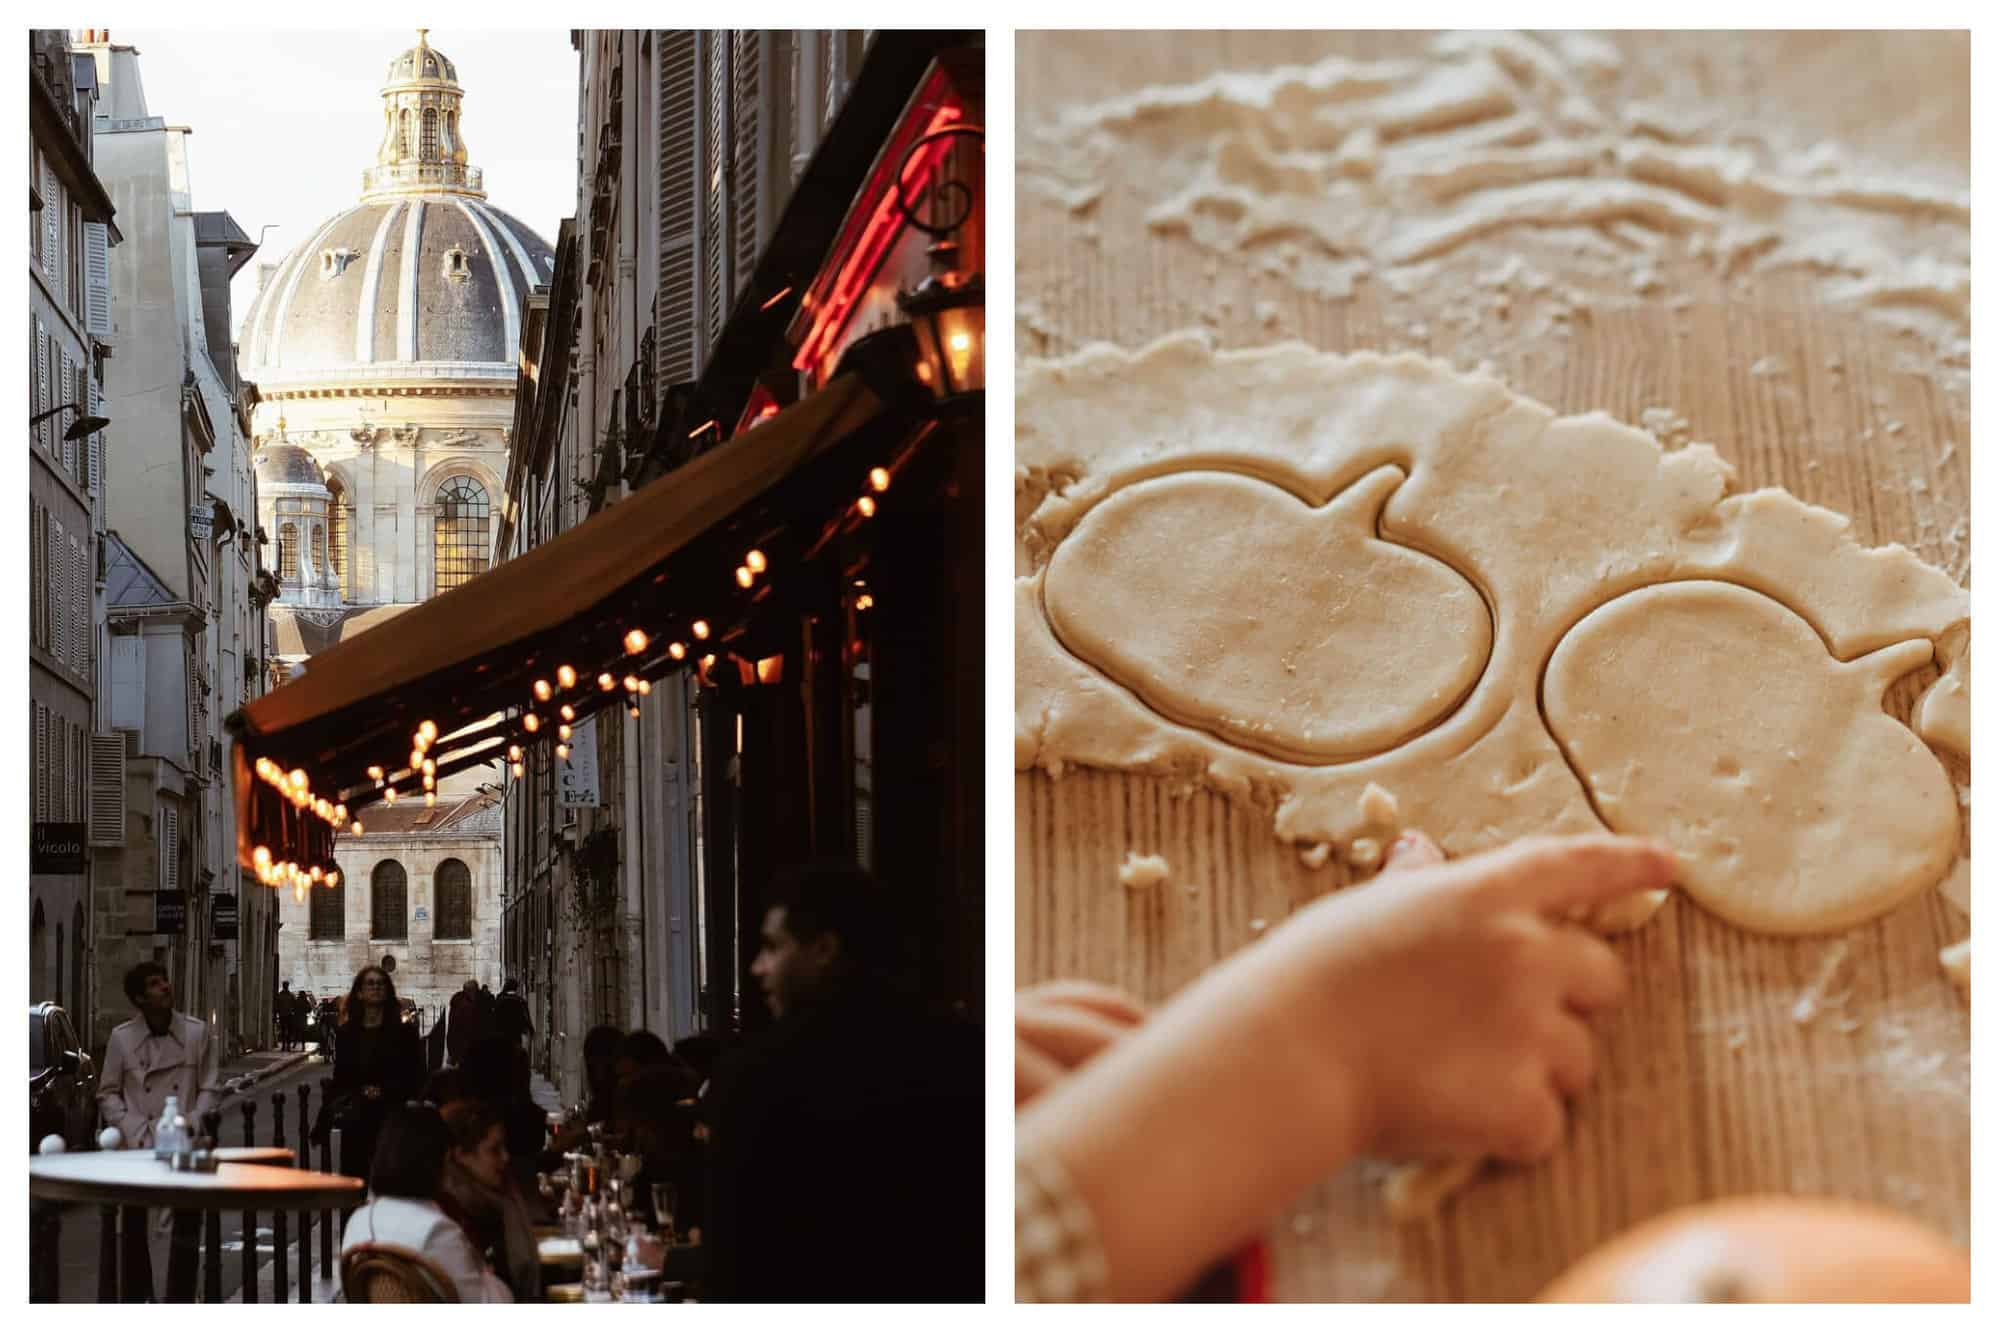 Left: A picture of a bar in a Parisian street with the Pantheon at the end of the street. Right: A child is baking some pumpkin-shaped bread for Thanksgiving.